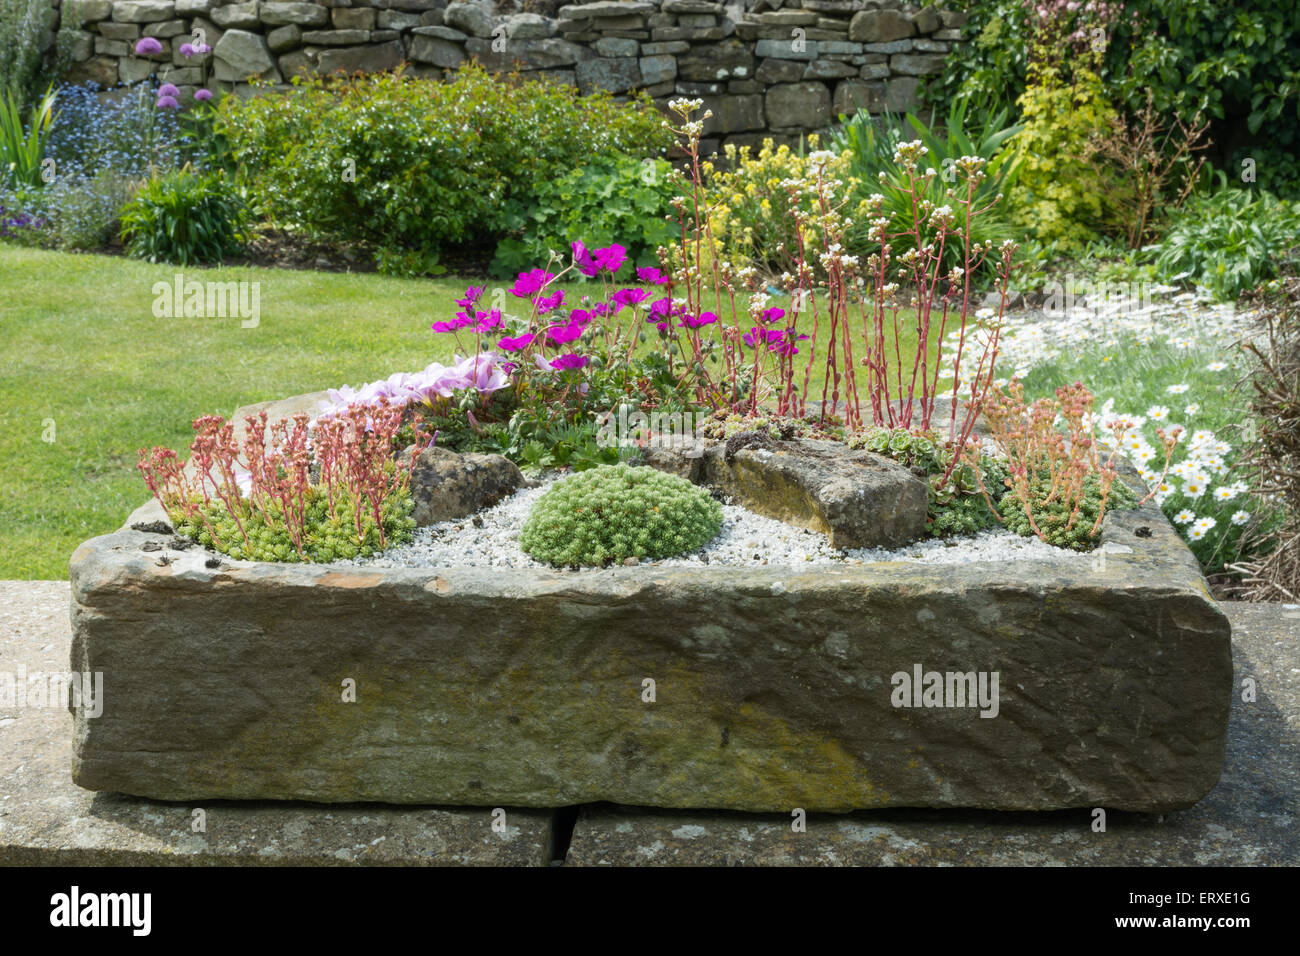 Alpines planted in a stone garden sink Stock Photo